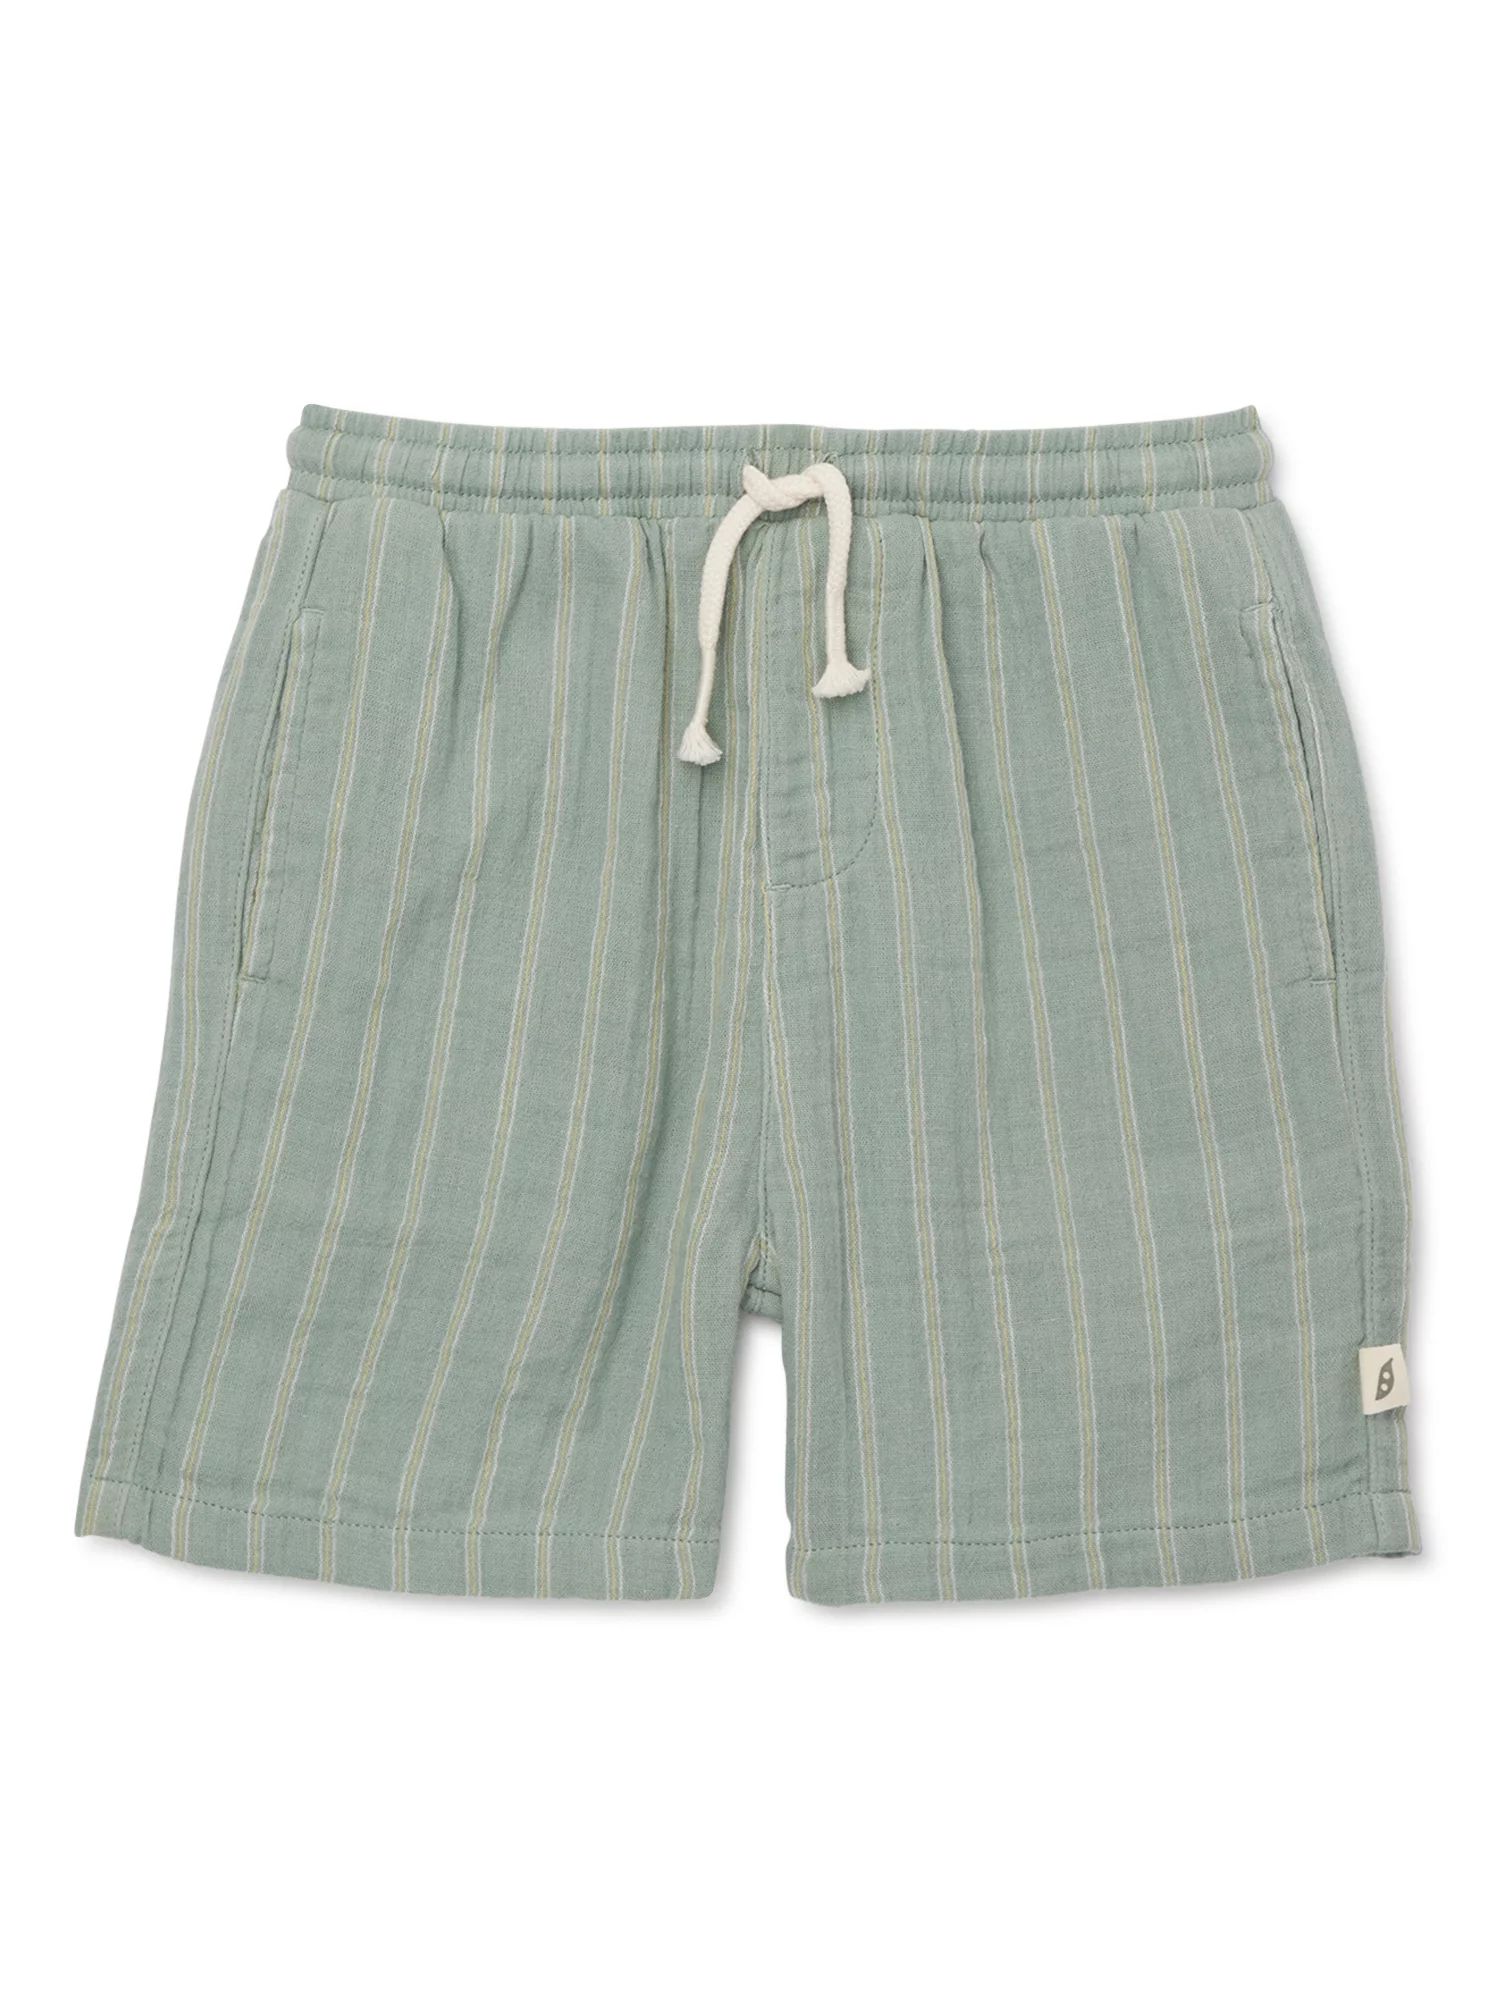 easy-peasy Baby and Toddler Boys Gauze Shorts, Sizes 12M-5T | Walmart (US)